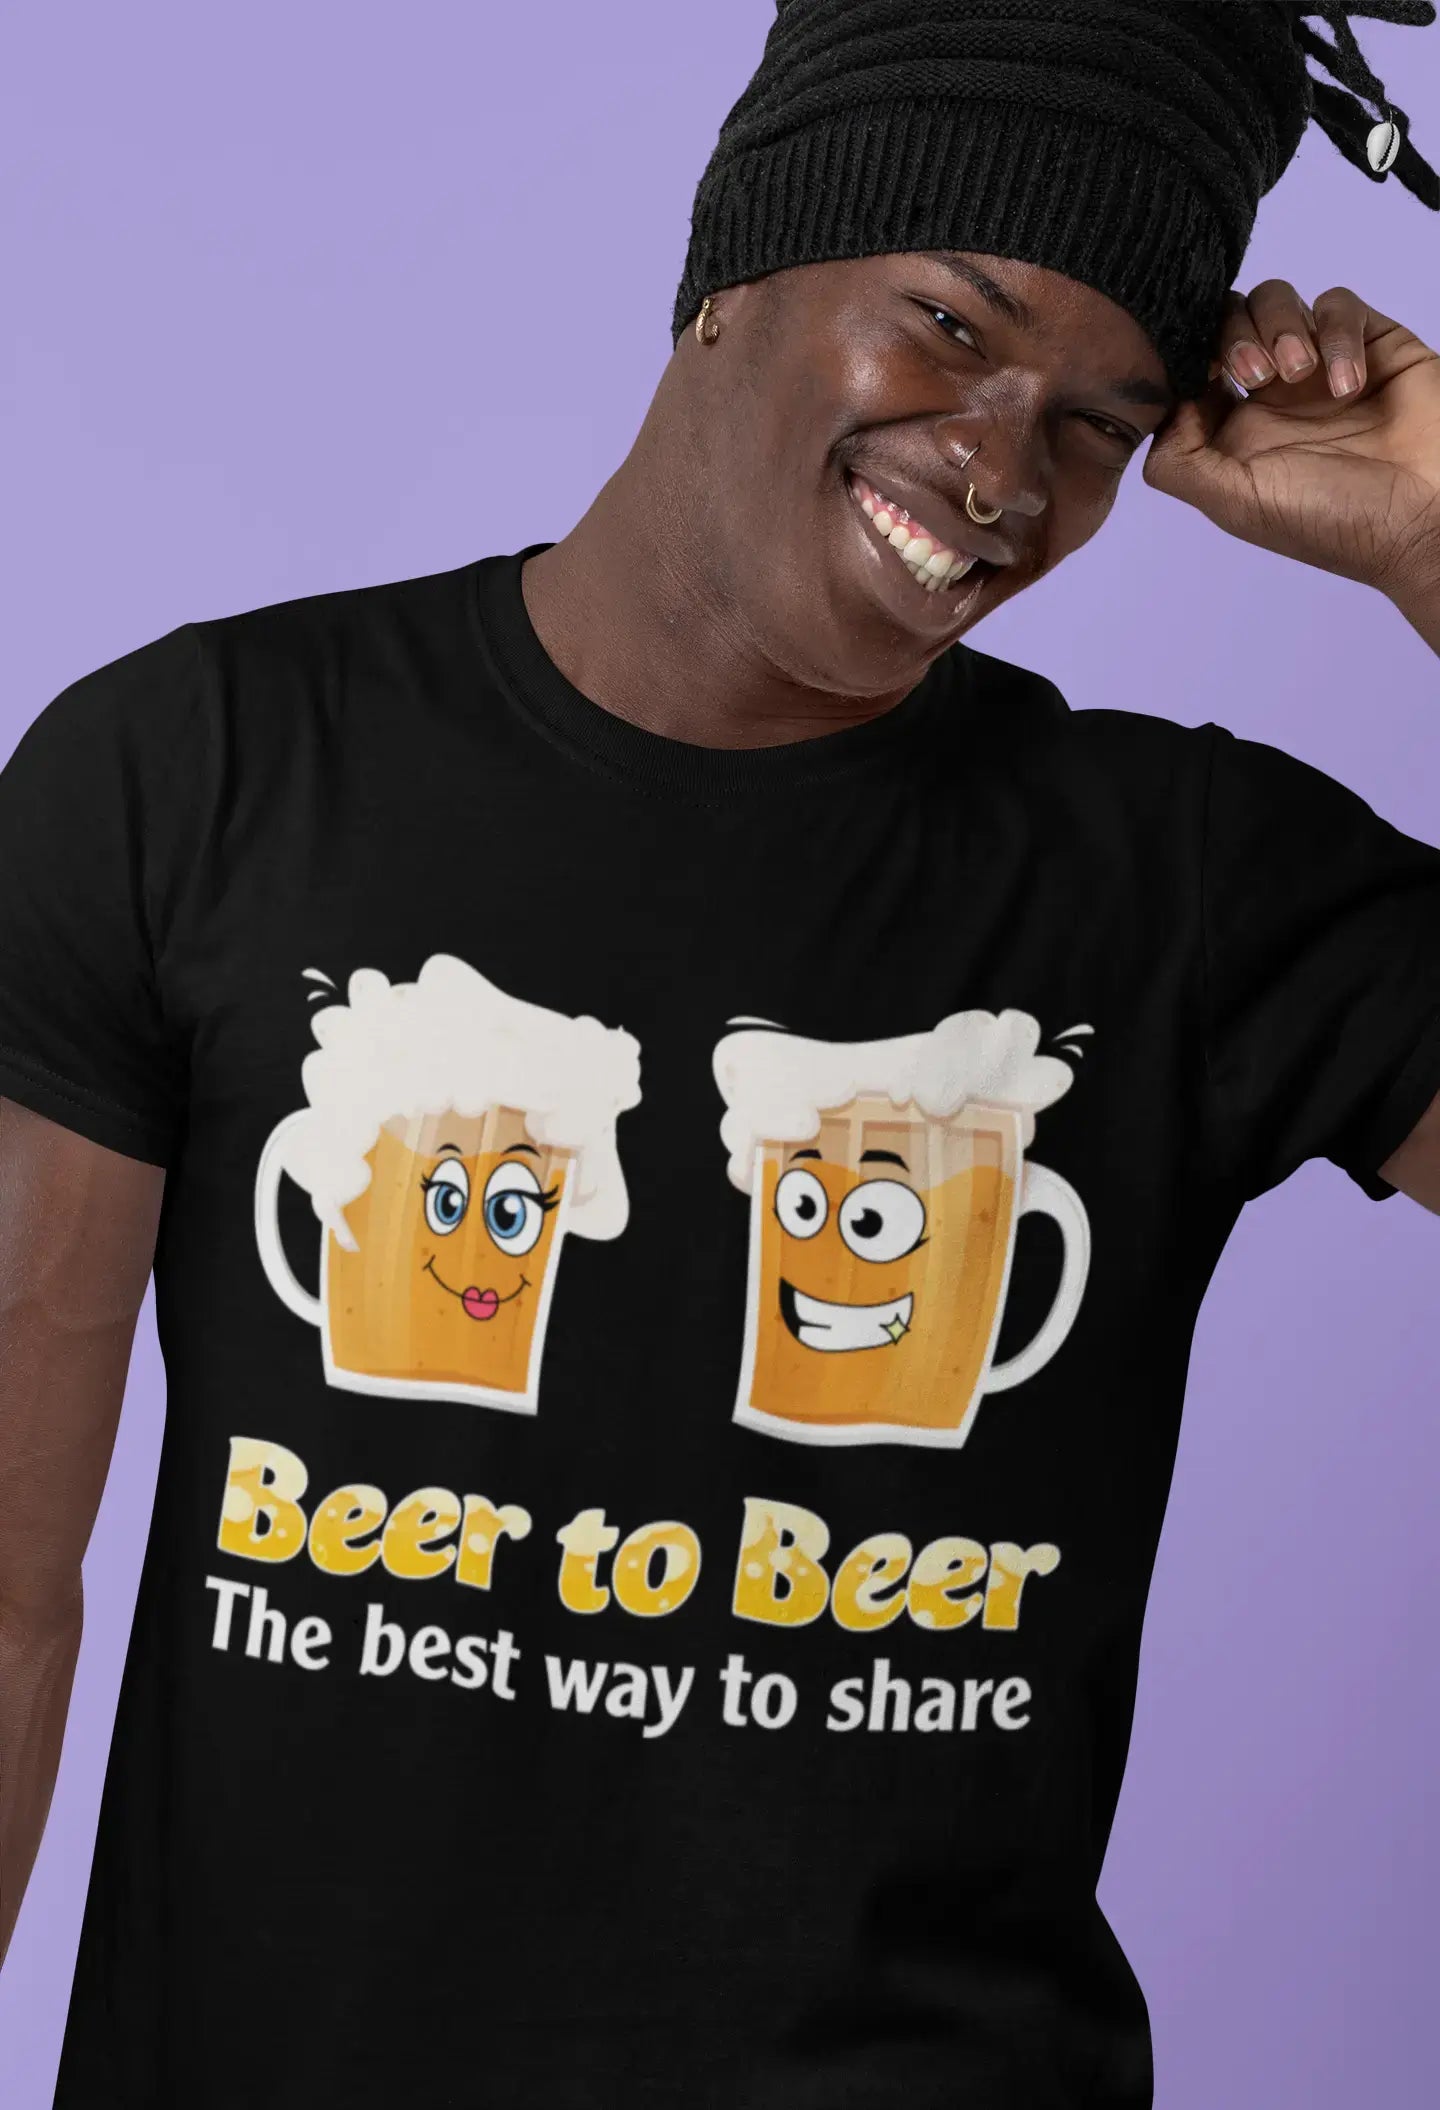 ULTRABASIC Men's T-Shirt Beer to Beer Best Way to Share - Funny Alcohol Lover Tee Shirt